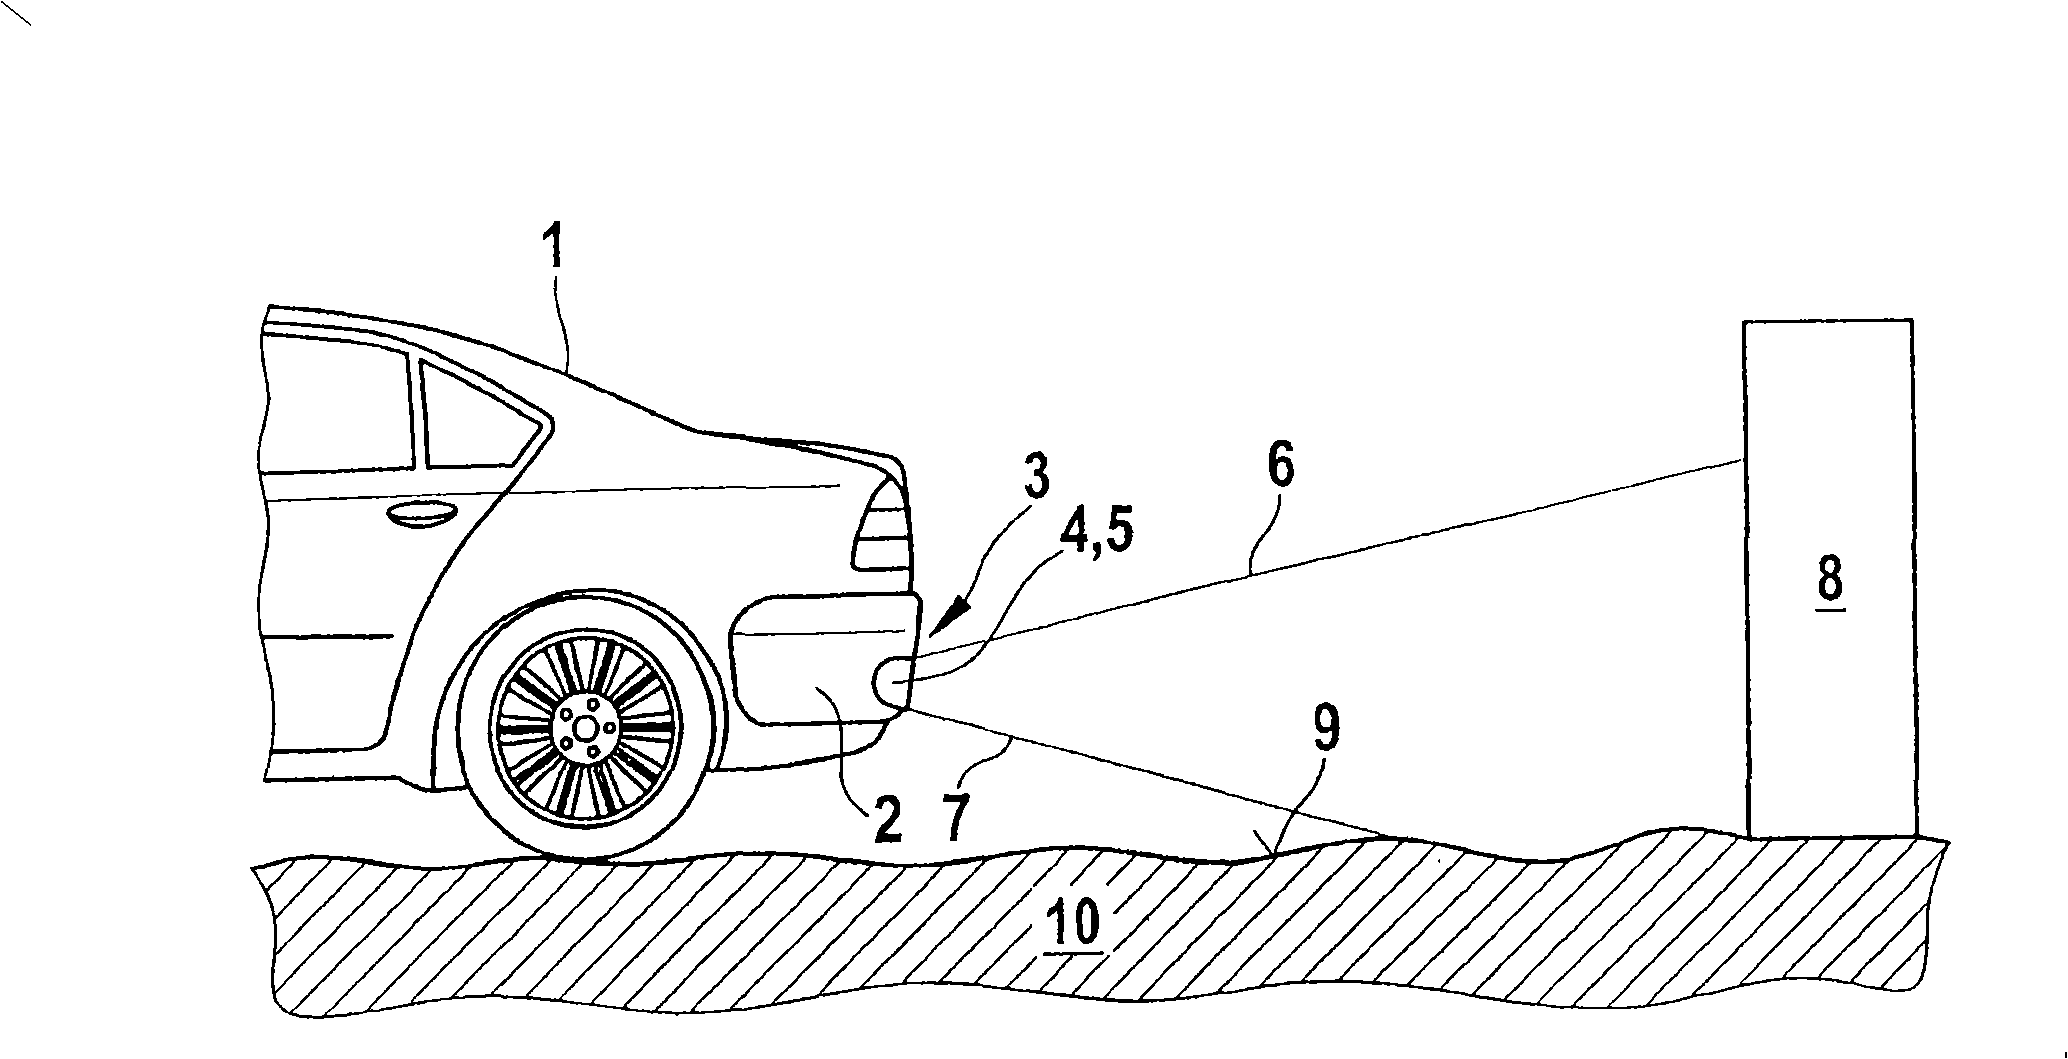 Method for a functional test of a distance measurement system